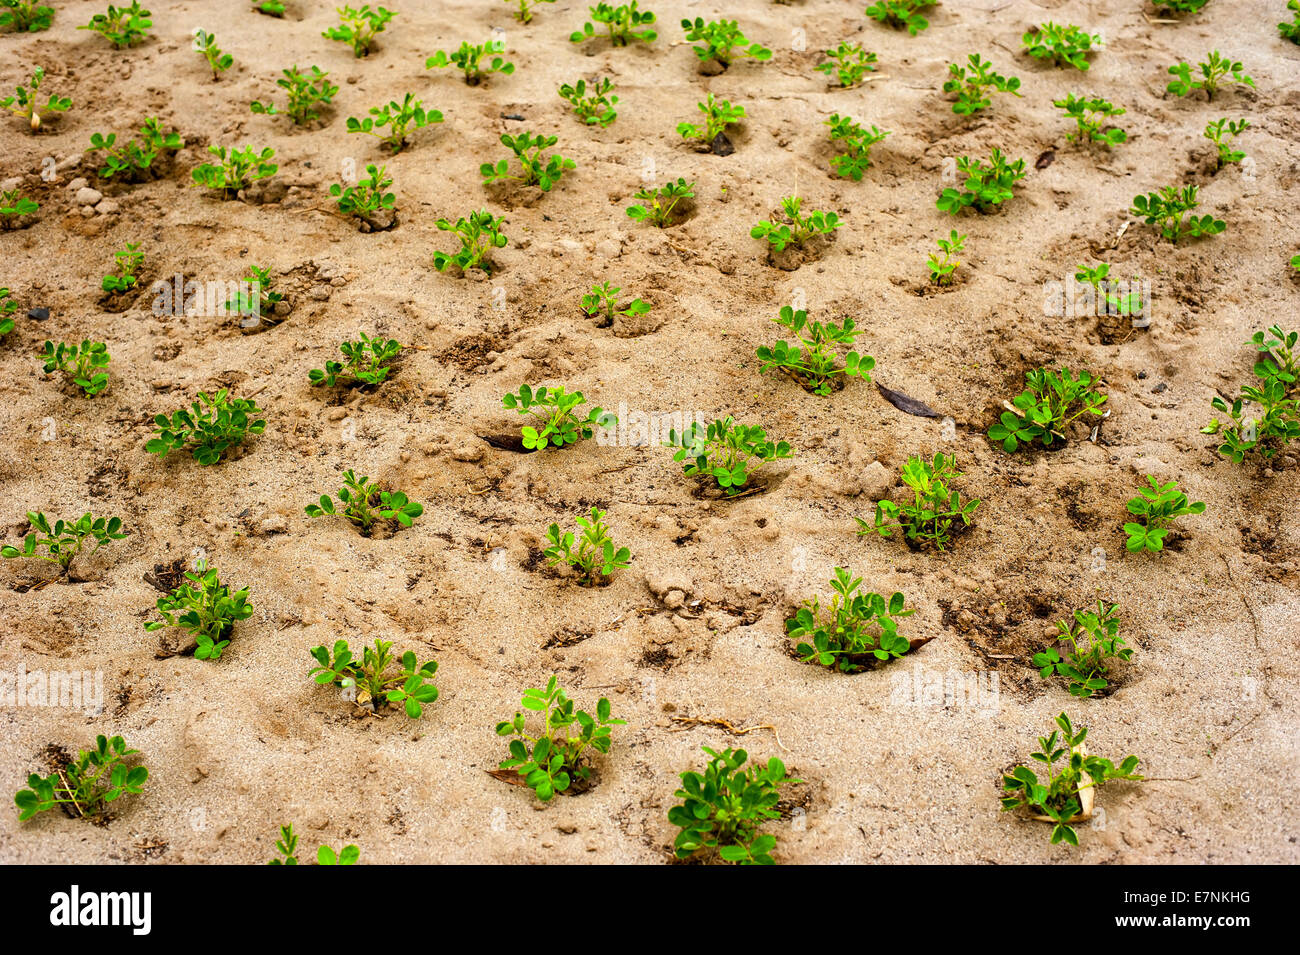 Organic agriculture background. Young plants growing at fertile soil along river banks at southeast asia Stock Photo